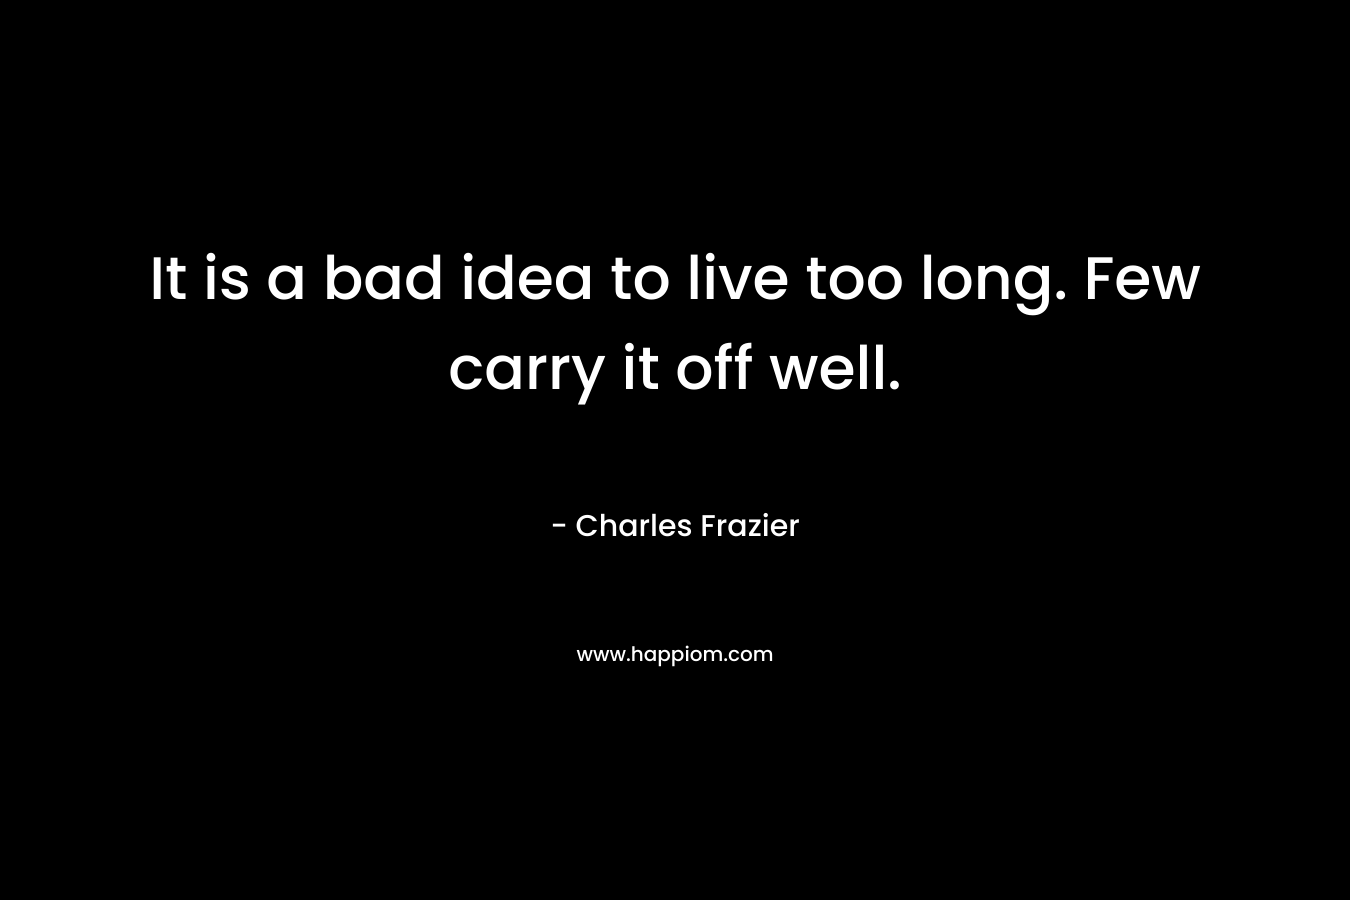 It is a bad idea to live too long. Few carry it off well. – Charles Frazier